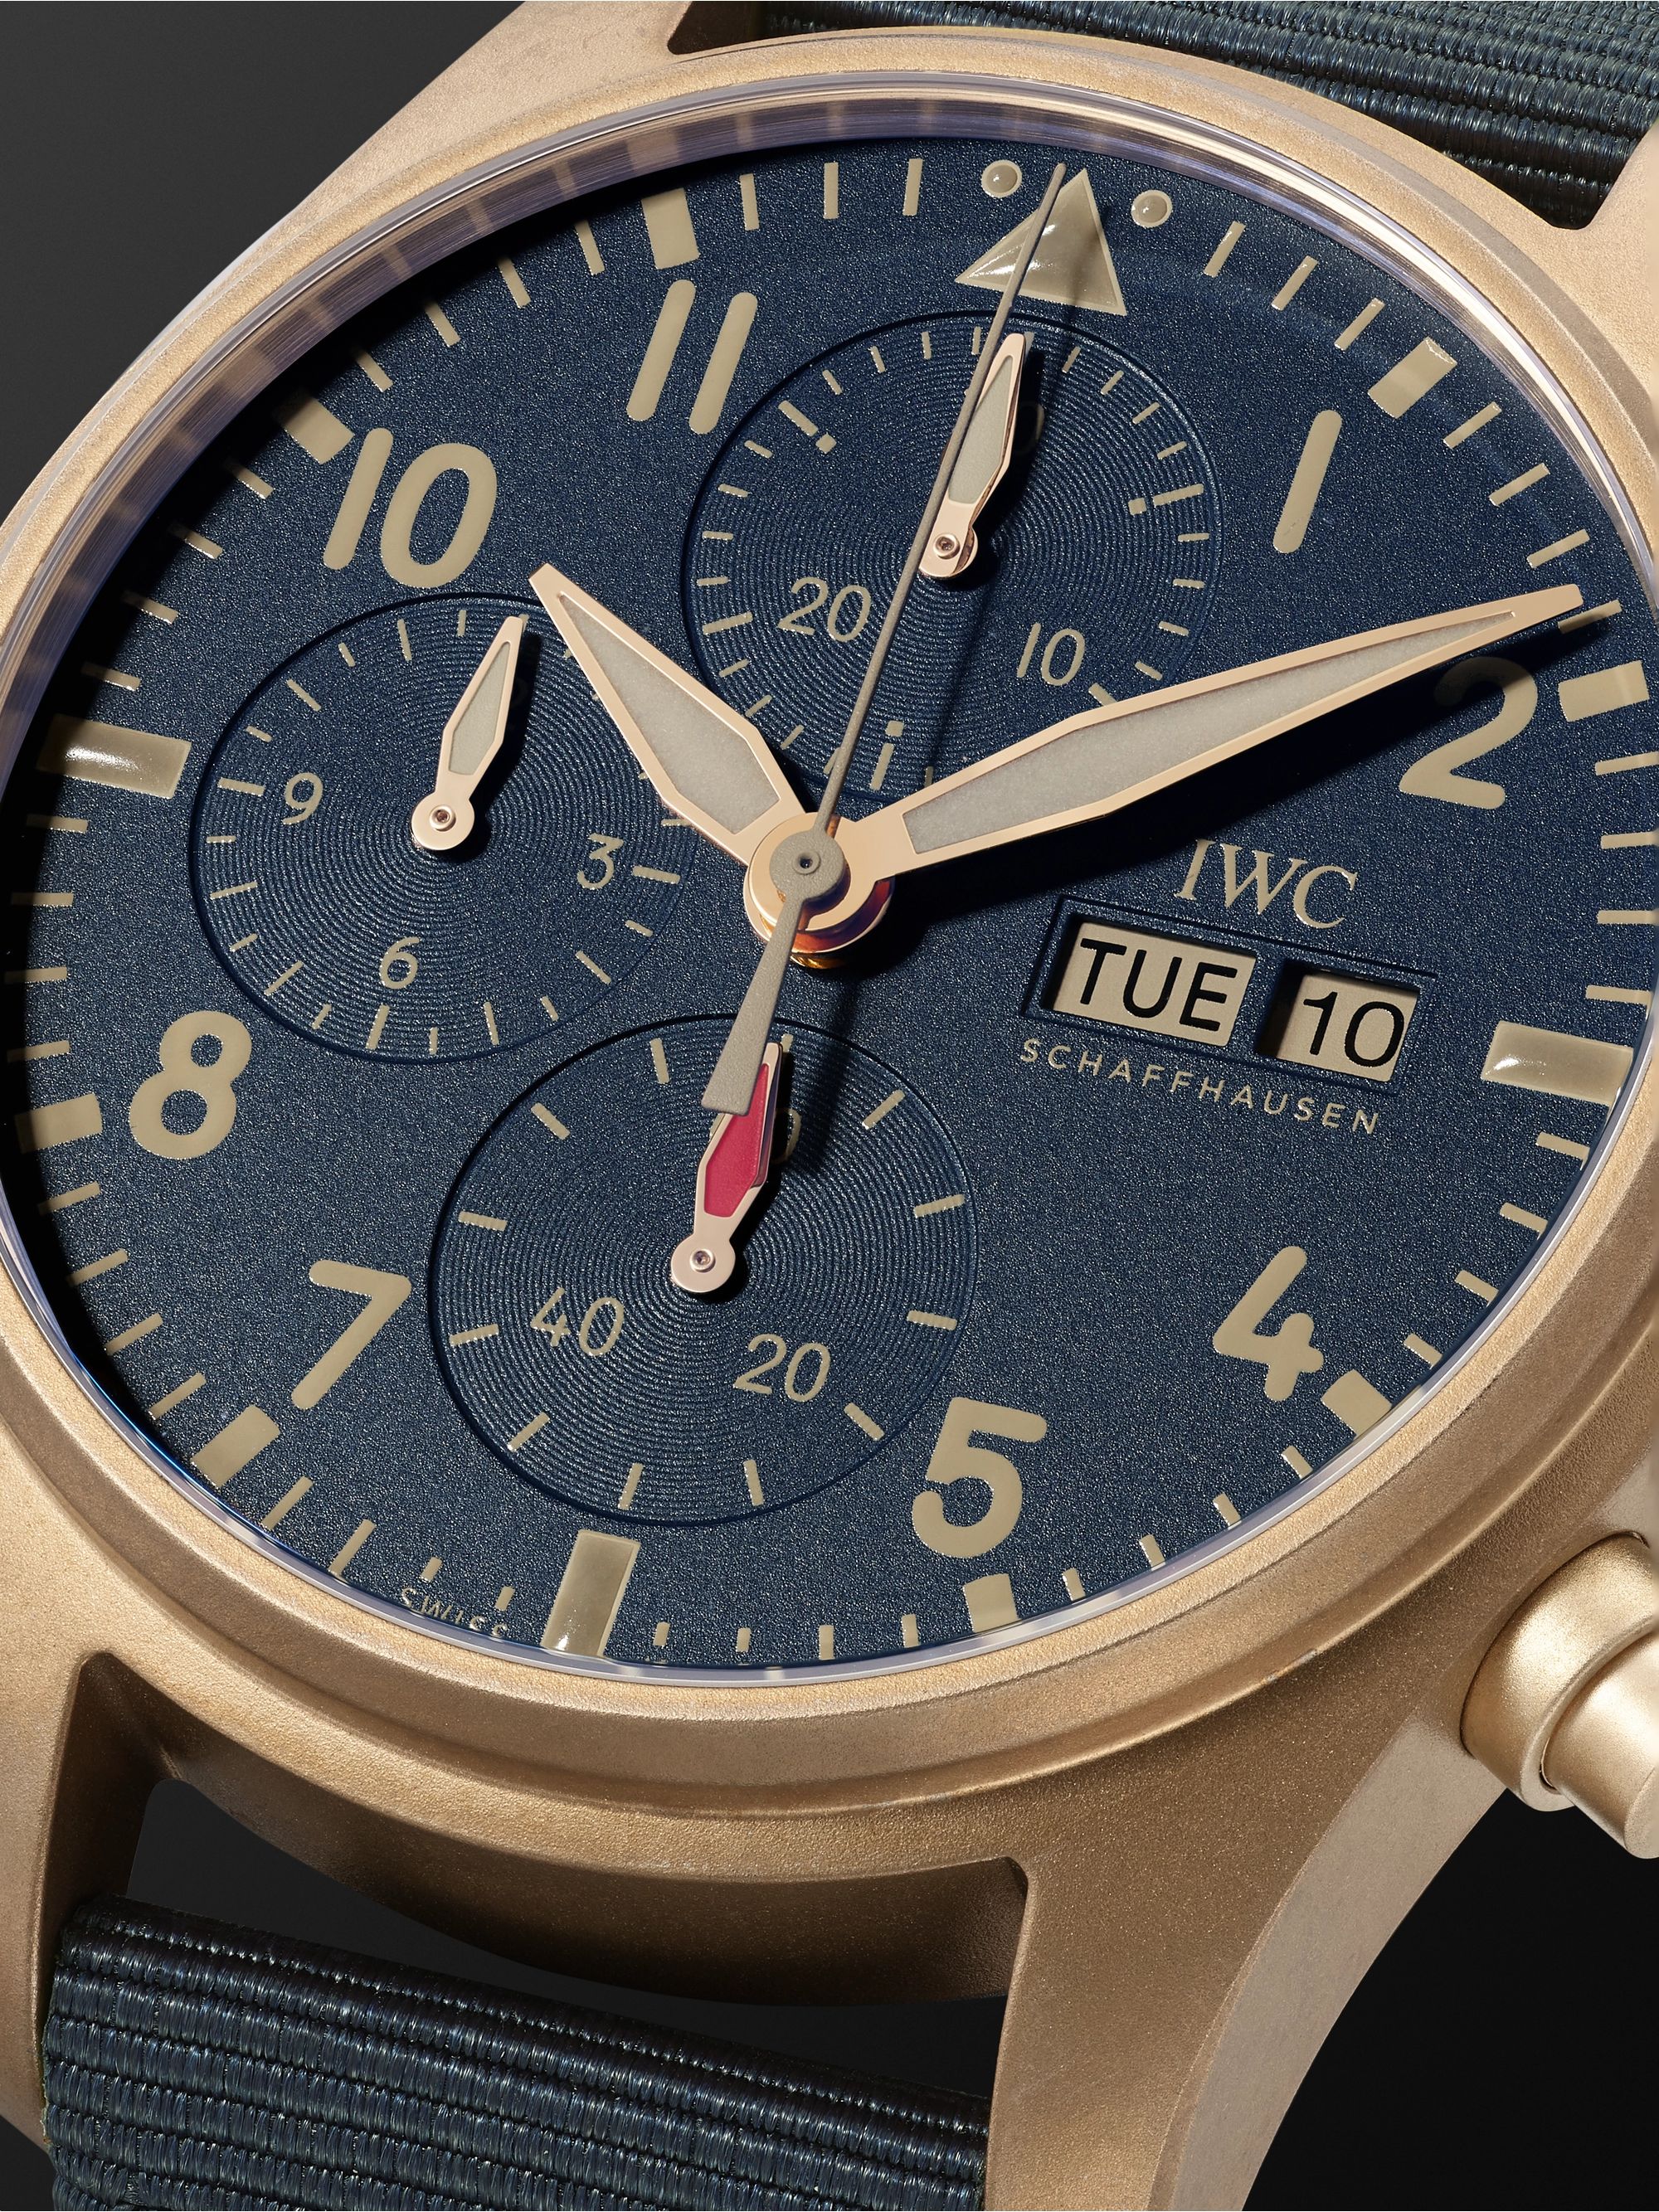 IWC SCHAFFHAUSEN Pilot's Automatic Chronograph 41mm Bronze and Textile Watch, Ref. No. IW388109